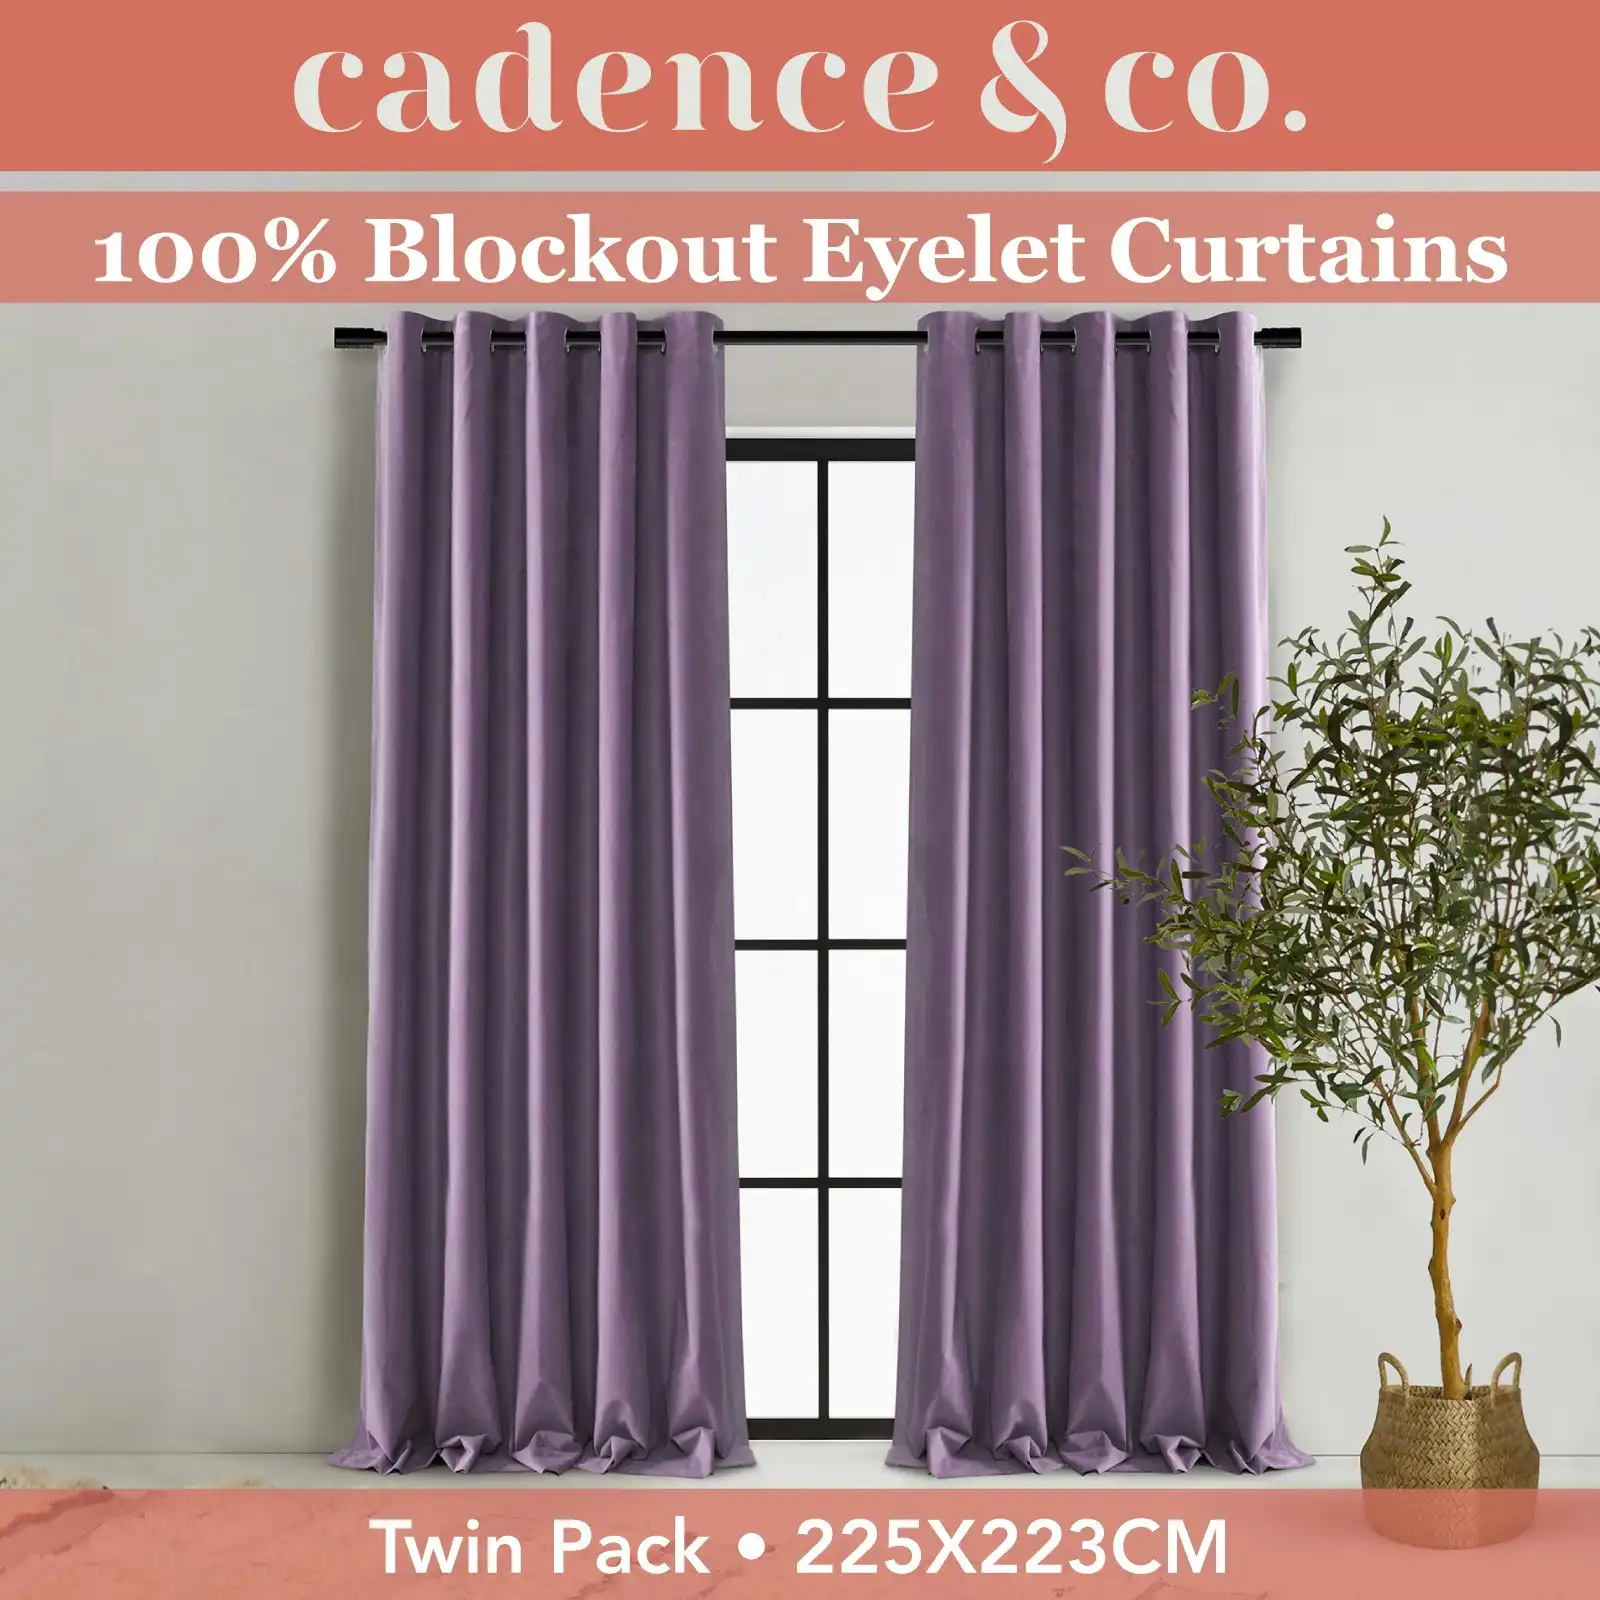 Cadence & Co Byron Matte Velvet 100% Blockout Eyelet Curtains Twin Pack Lilac 225x223cm